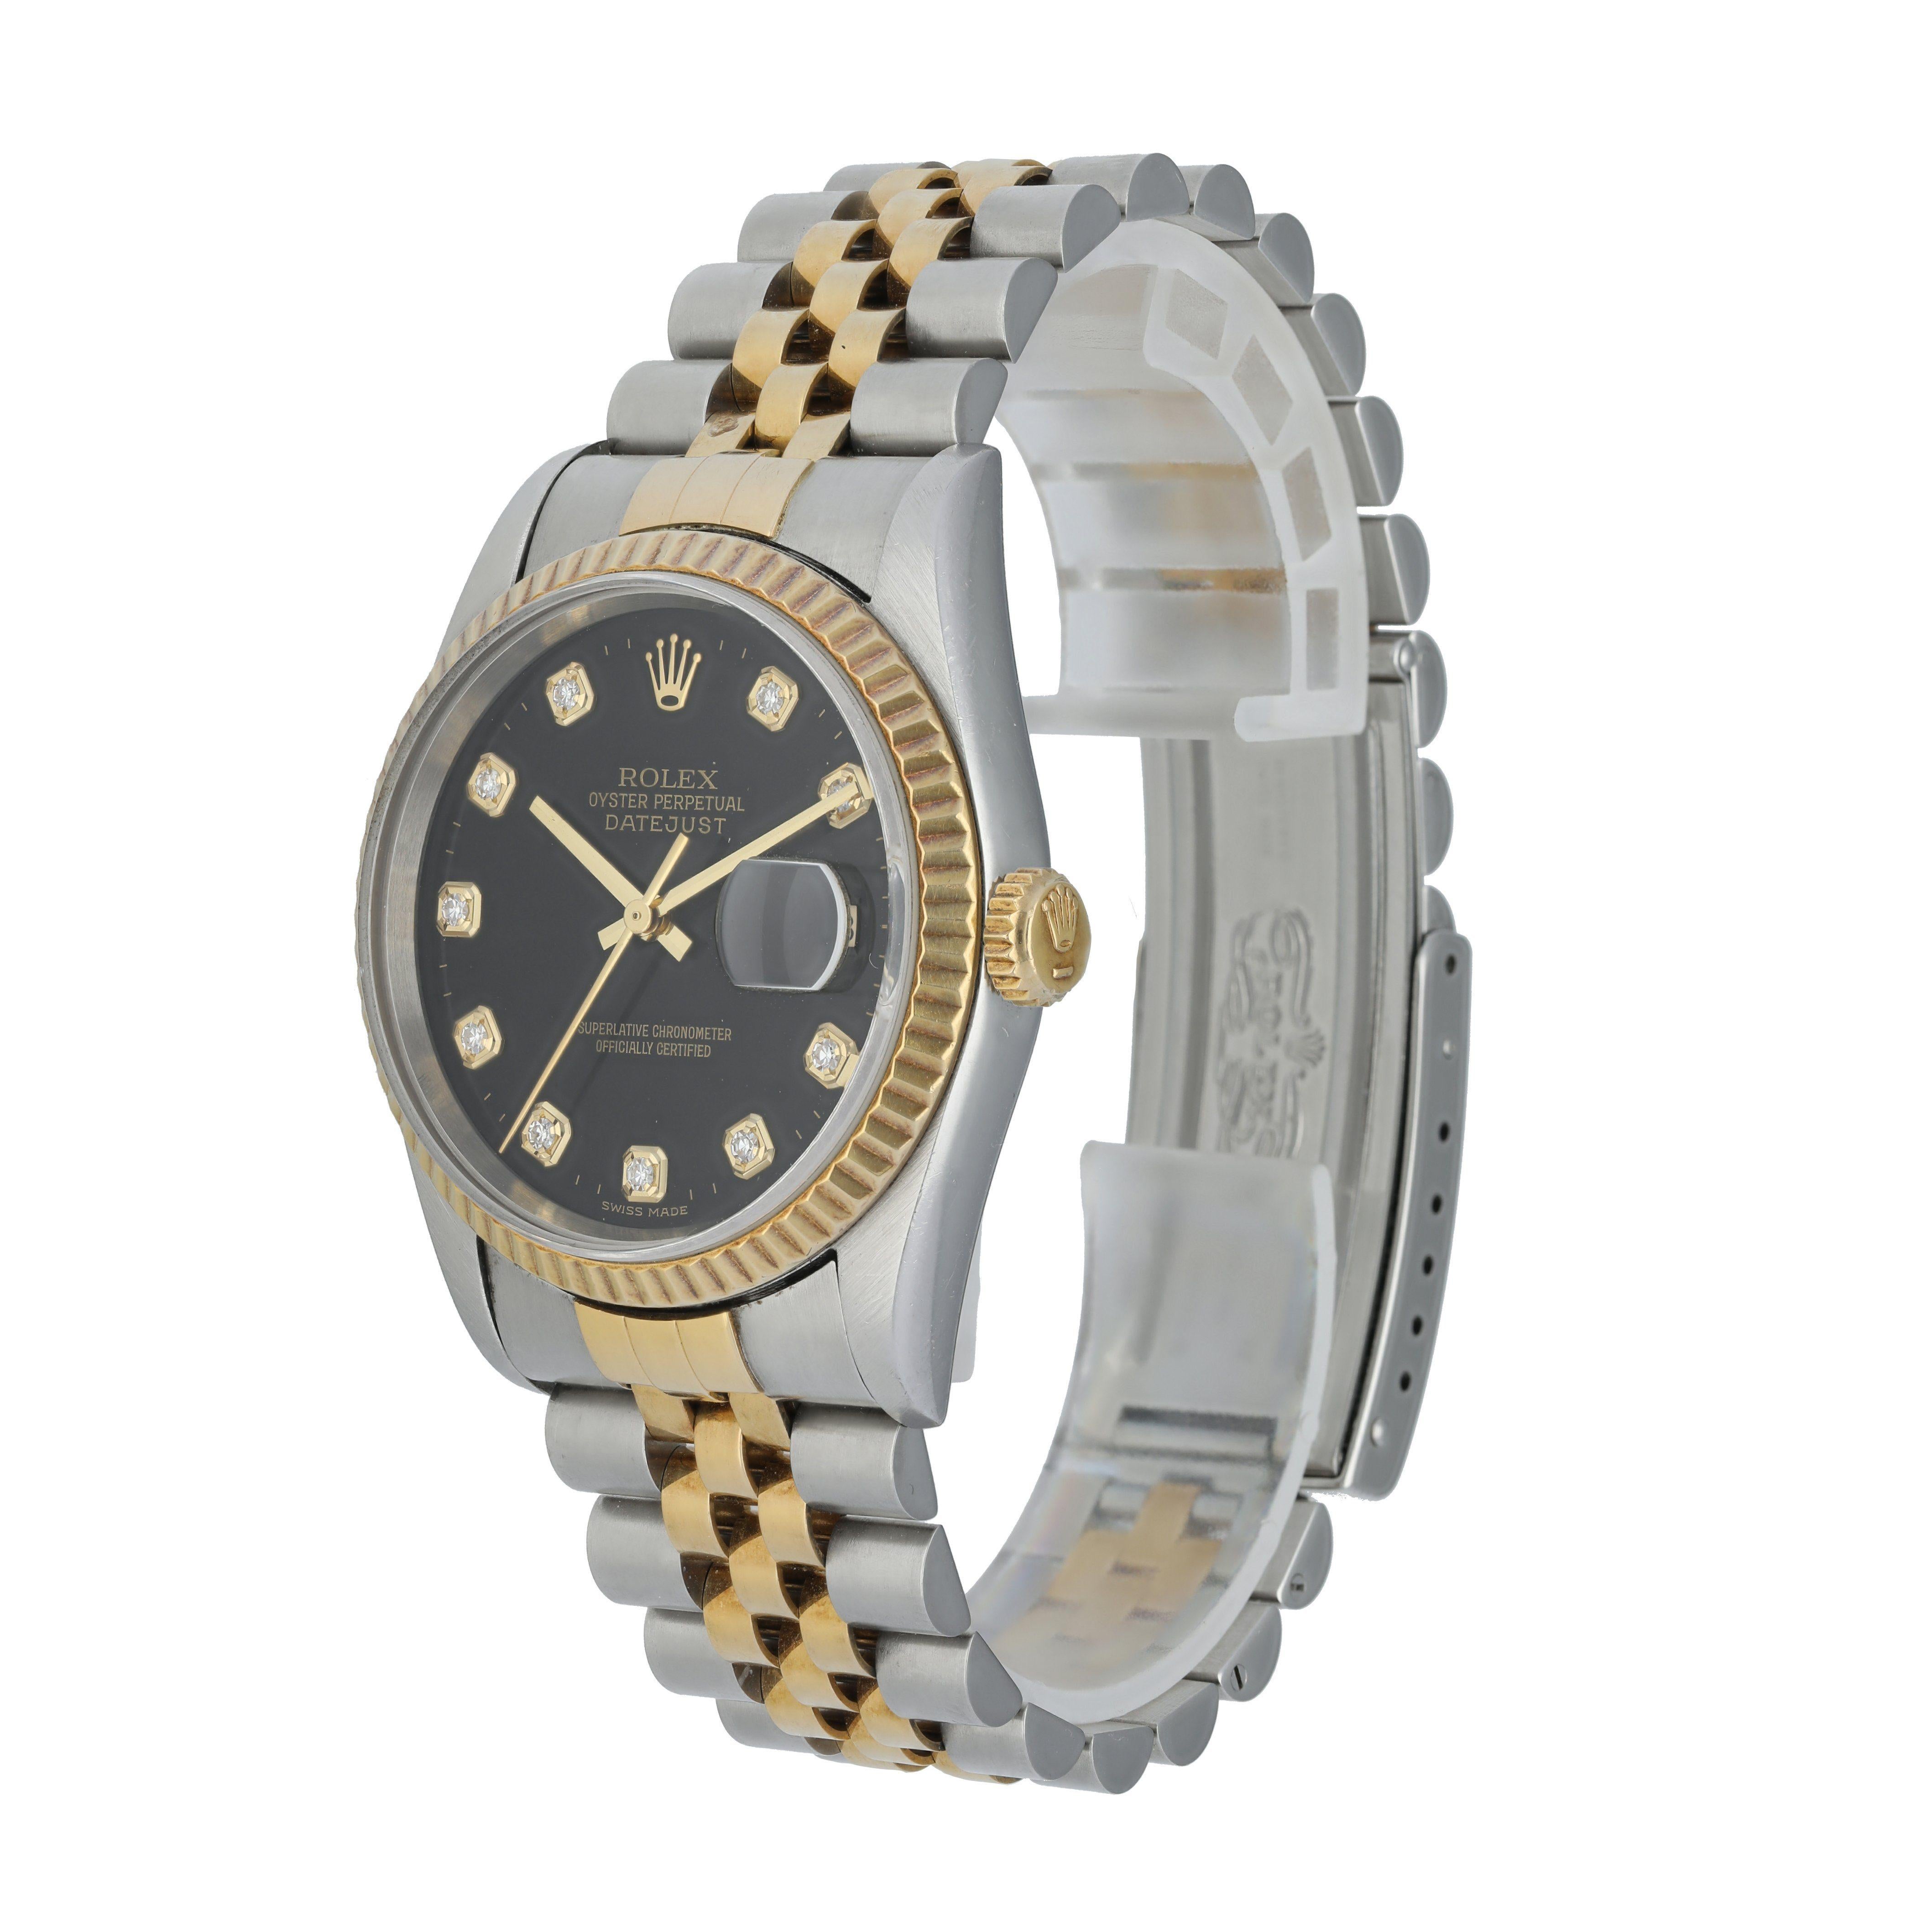 Rolex Datejust 16233 Men's Watch.
36mm stainless steel case with yellow gold fluted bezel.
Black dial with gold hands and factory set diamond hour markers.
Minute markers on the outer dial.
Date display at the 3 o'clock position.
Stainless steel